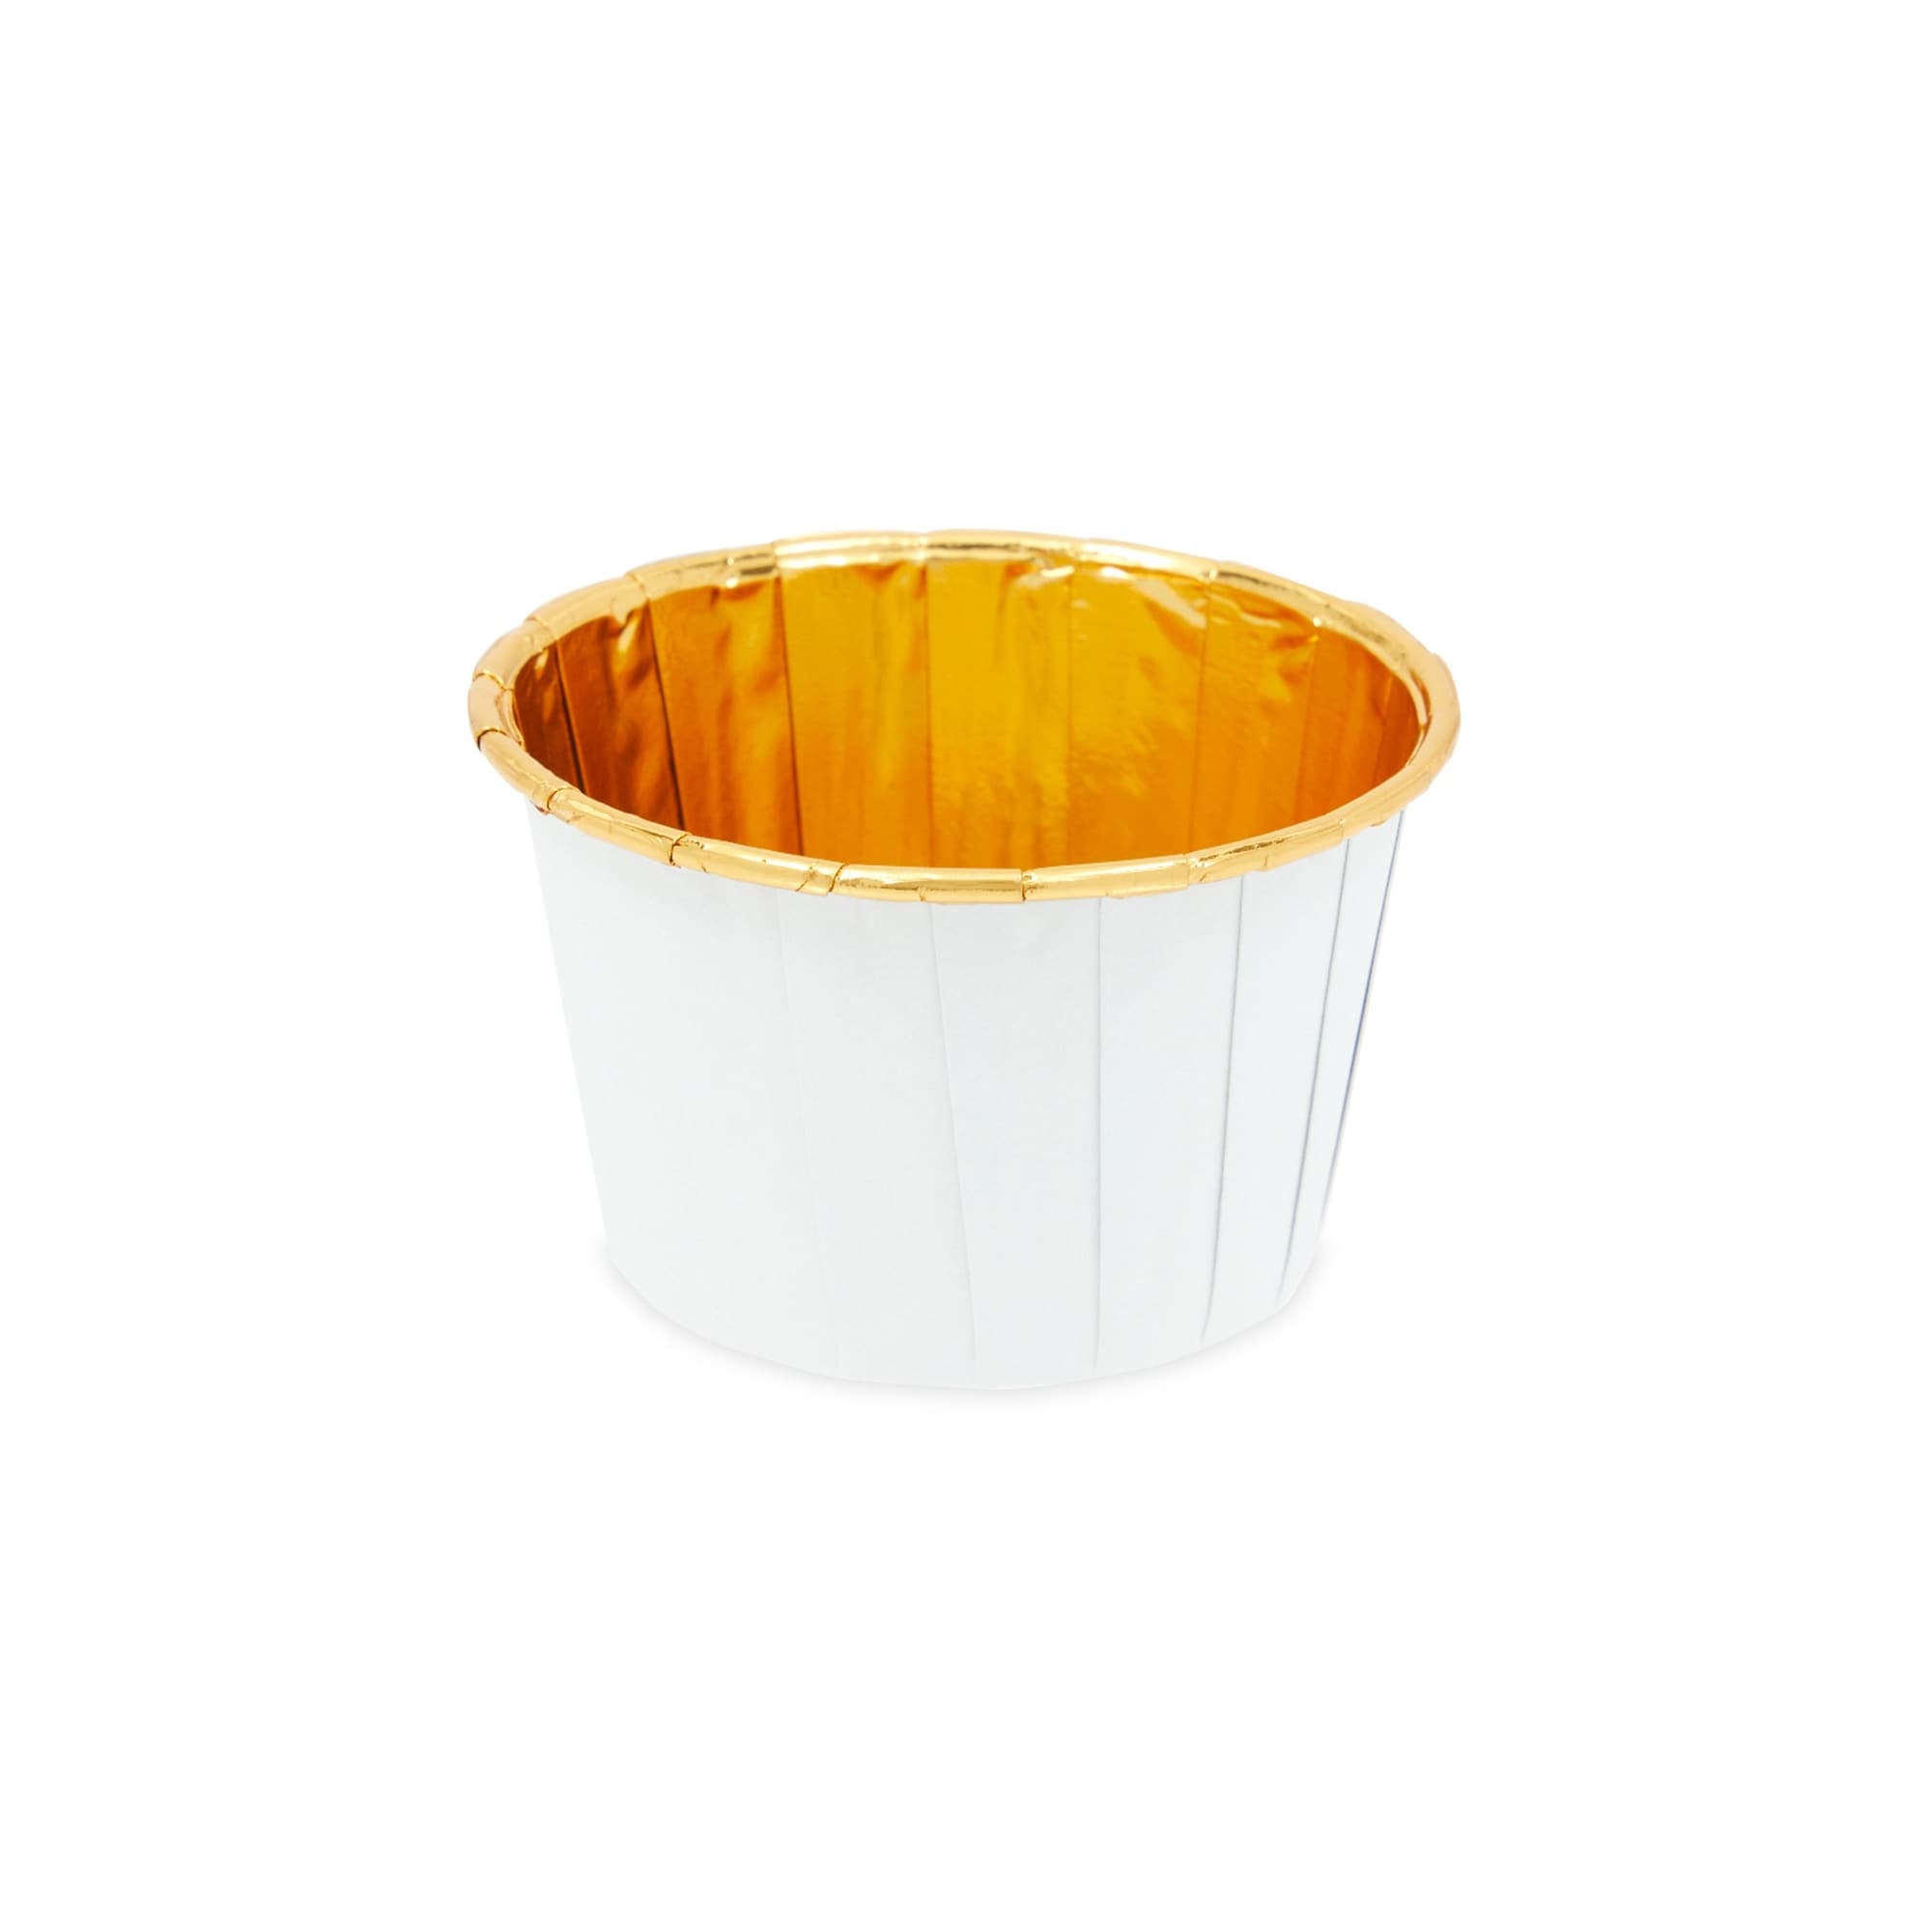 https://ak1.ostkcdn.com/images/products/is/images/direct/34bca25fa0ff4e2c6ab7046539bdc73f5ea85199/White-and-Gold-Foil-Cupcake-Liners%2C-Standard-Muffin-Baking-Cups-%28100-Pack%29.jpg